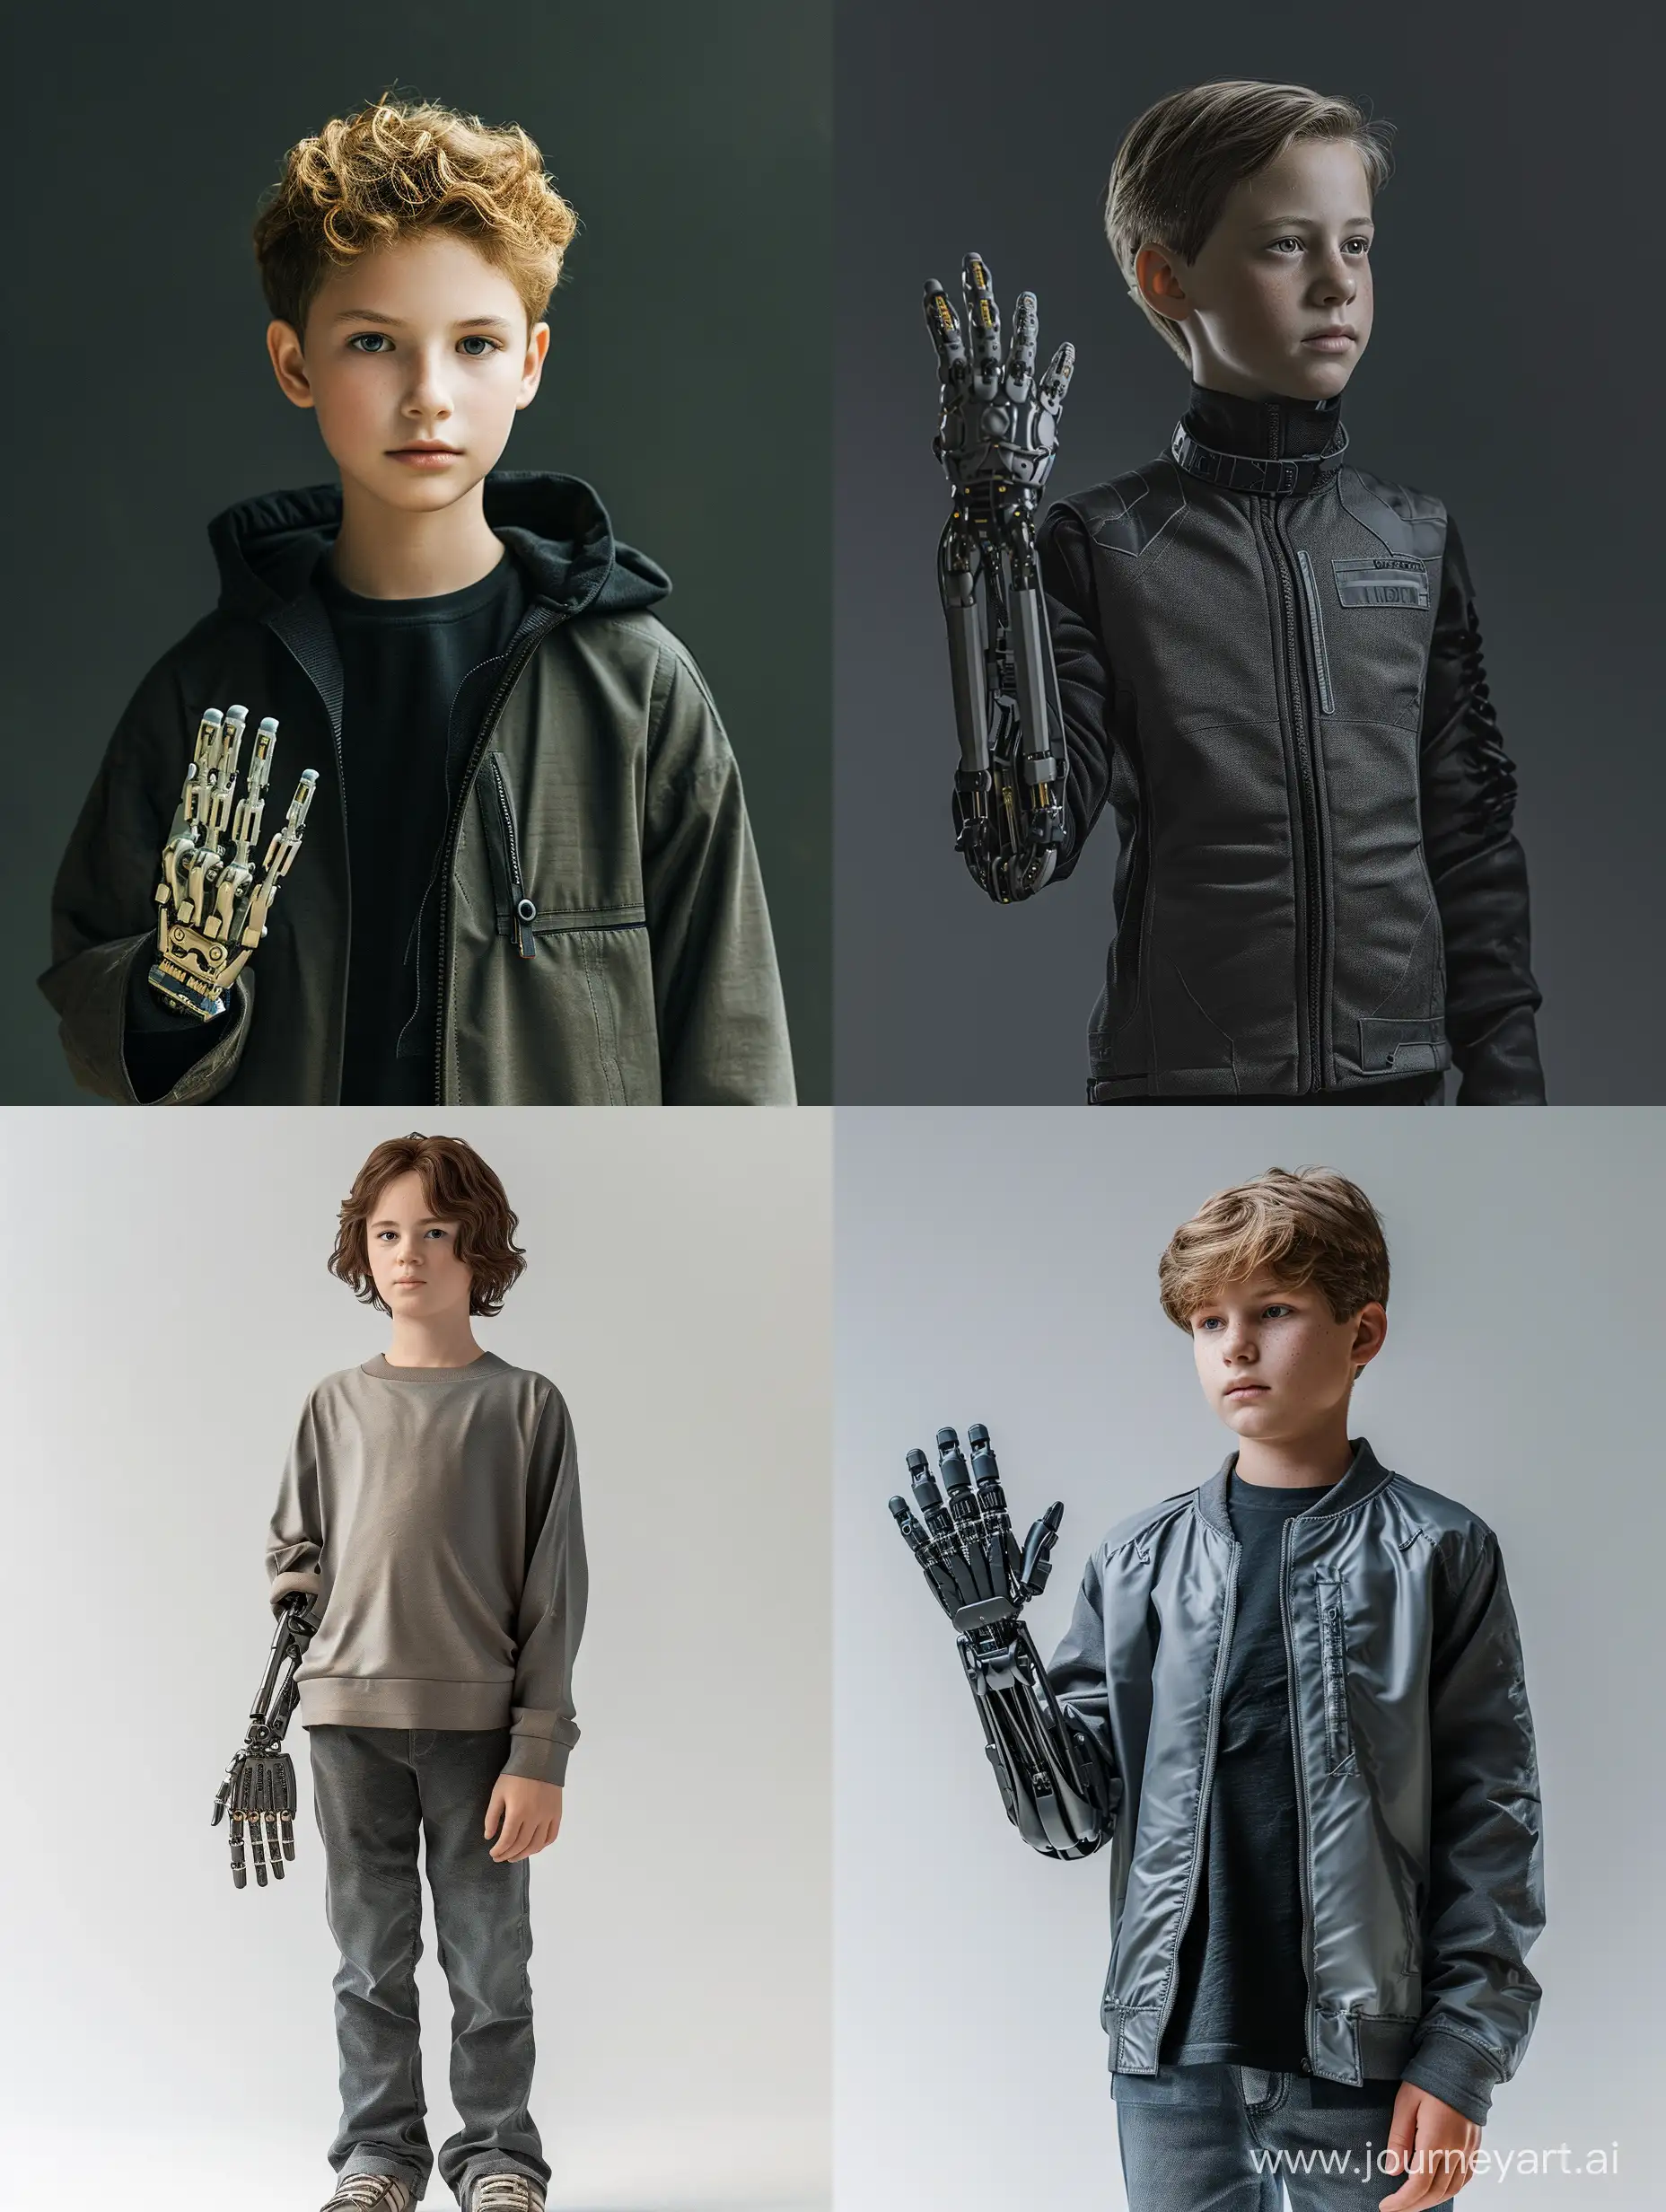 ultra-realistic and photorealistic, ultra-realistic teenage boy standing showing her new Bionic left Hand, modern style, ultra-realistic photography, high-tech, digital, masterpiece, 32k UHD resolution, high quality, professional photography

